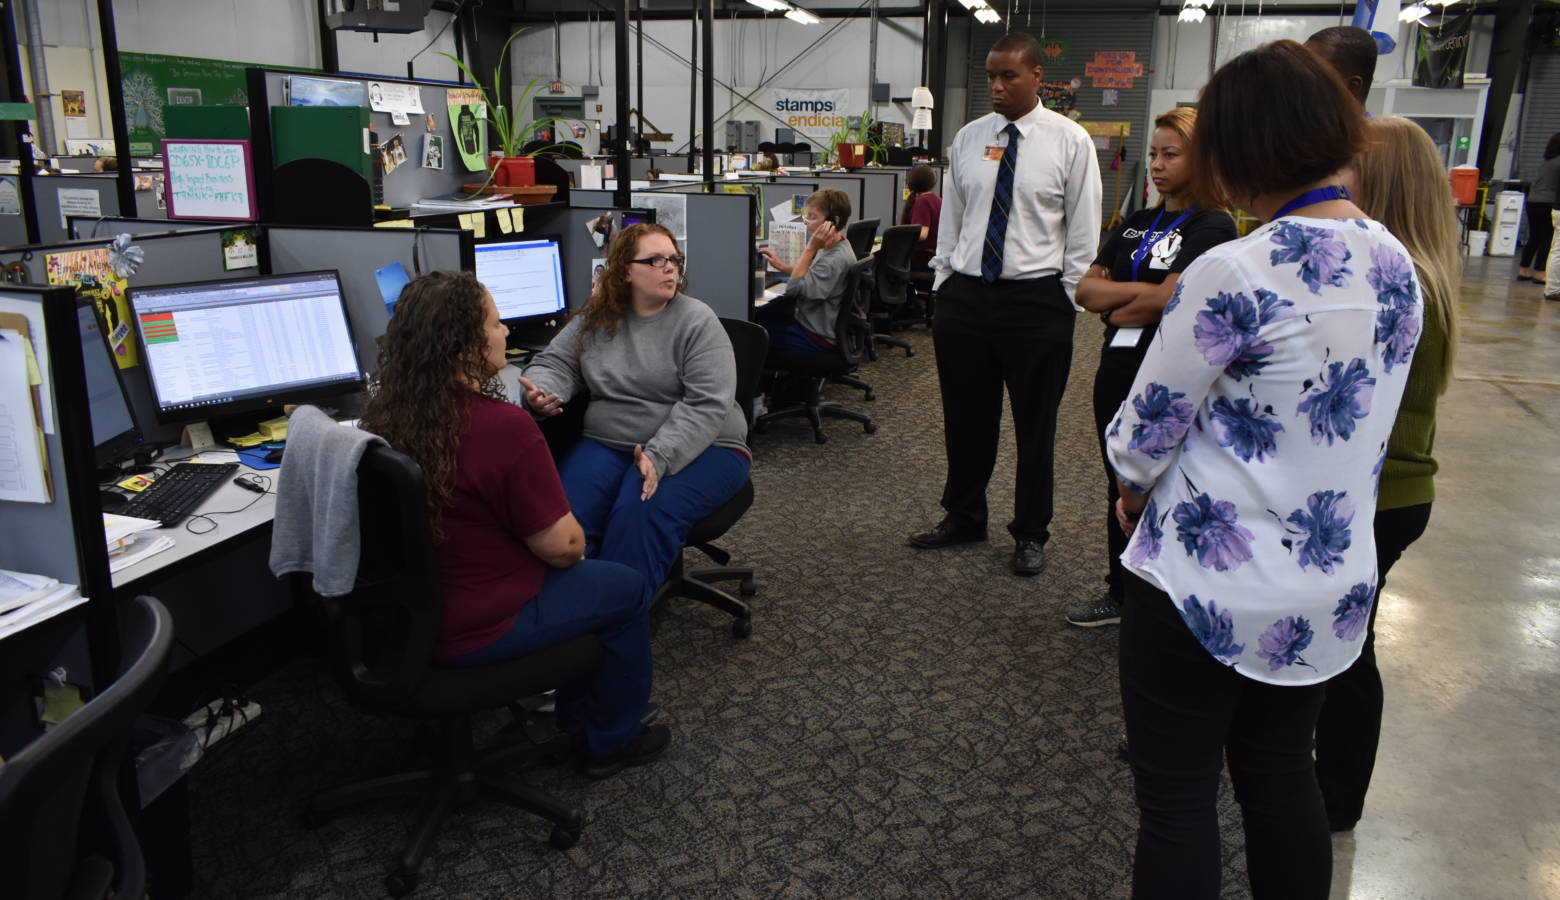 Employers speak with inmates at the Televerde call center located within Rockville Correctional Facility. (Justin Hicks/IPB News)